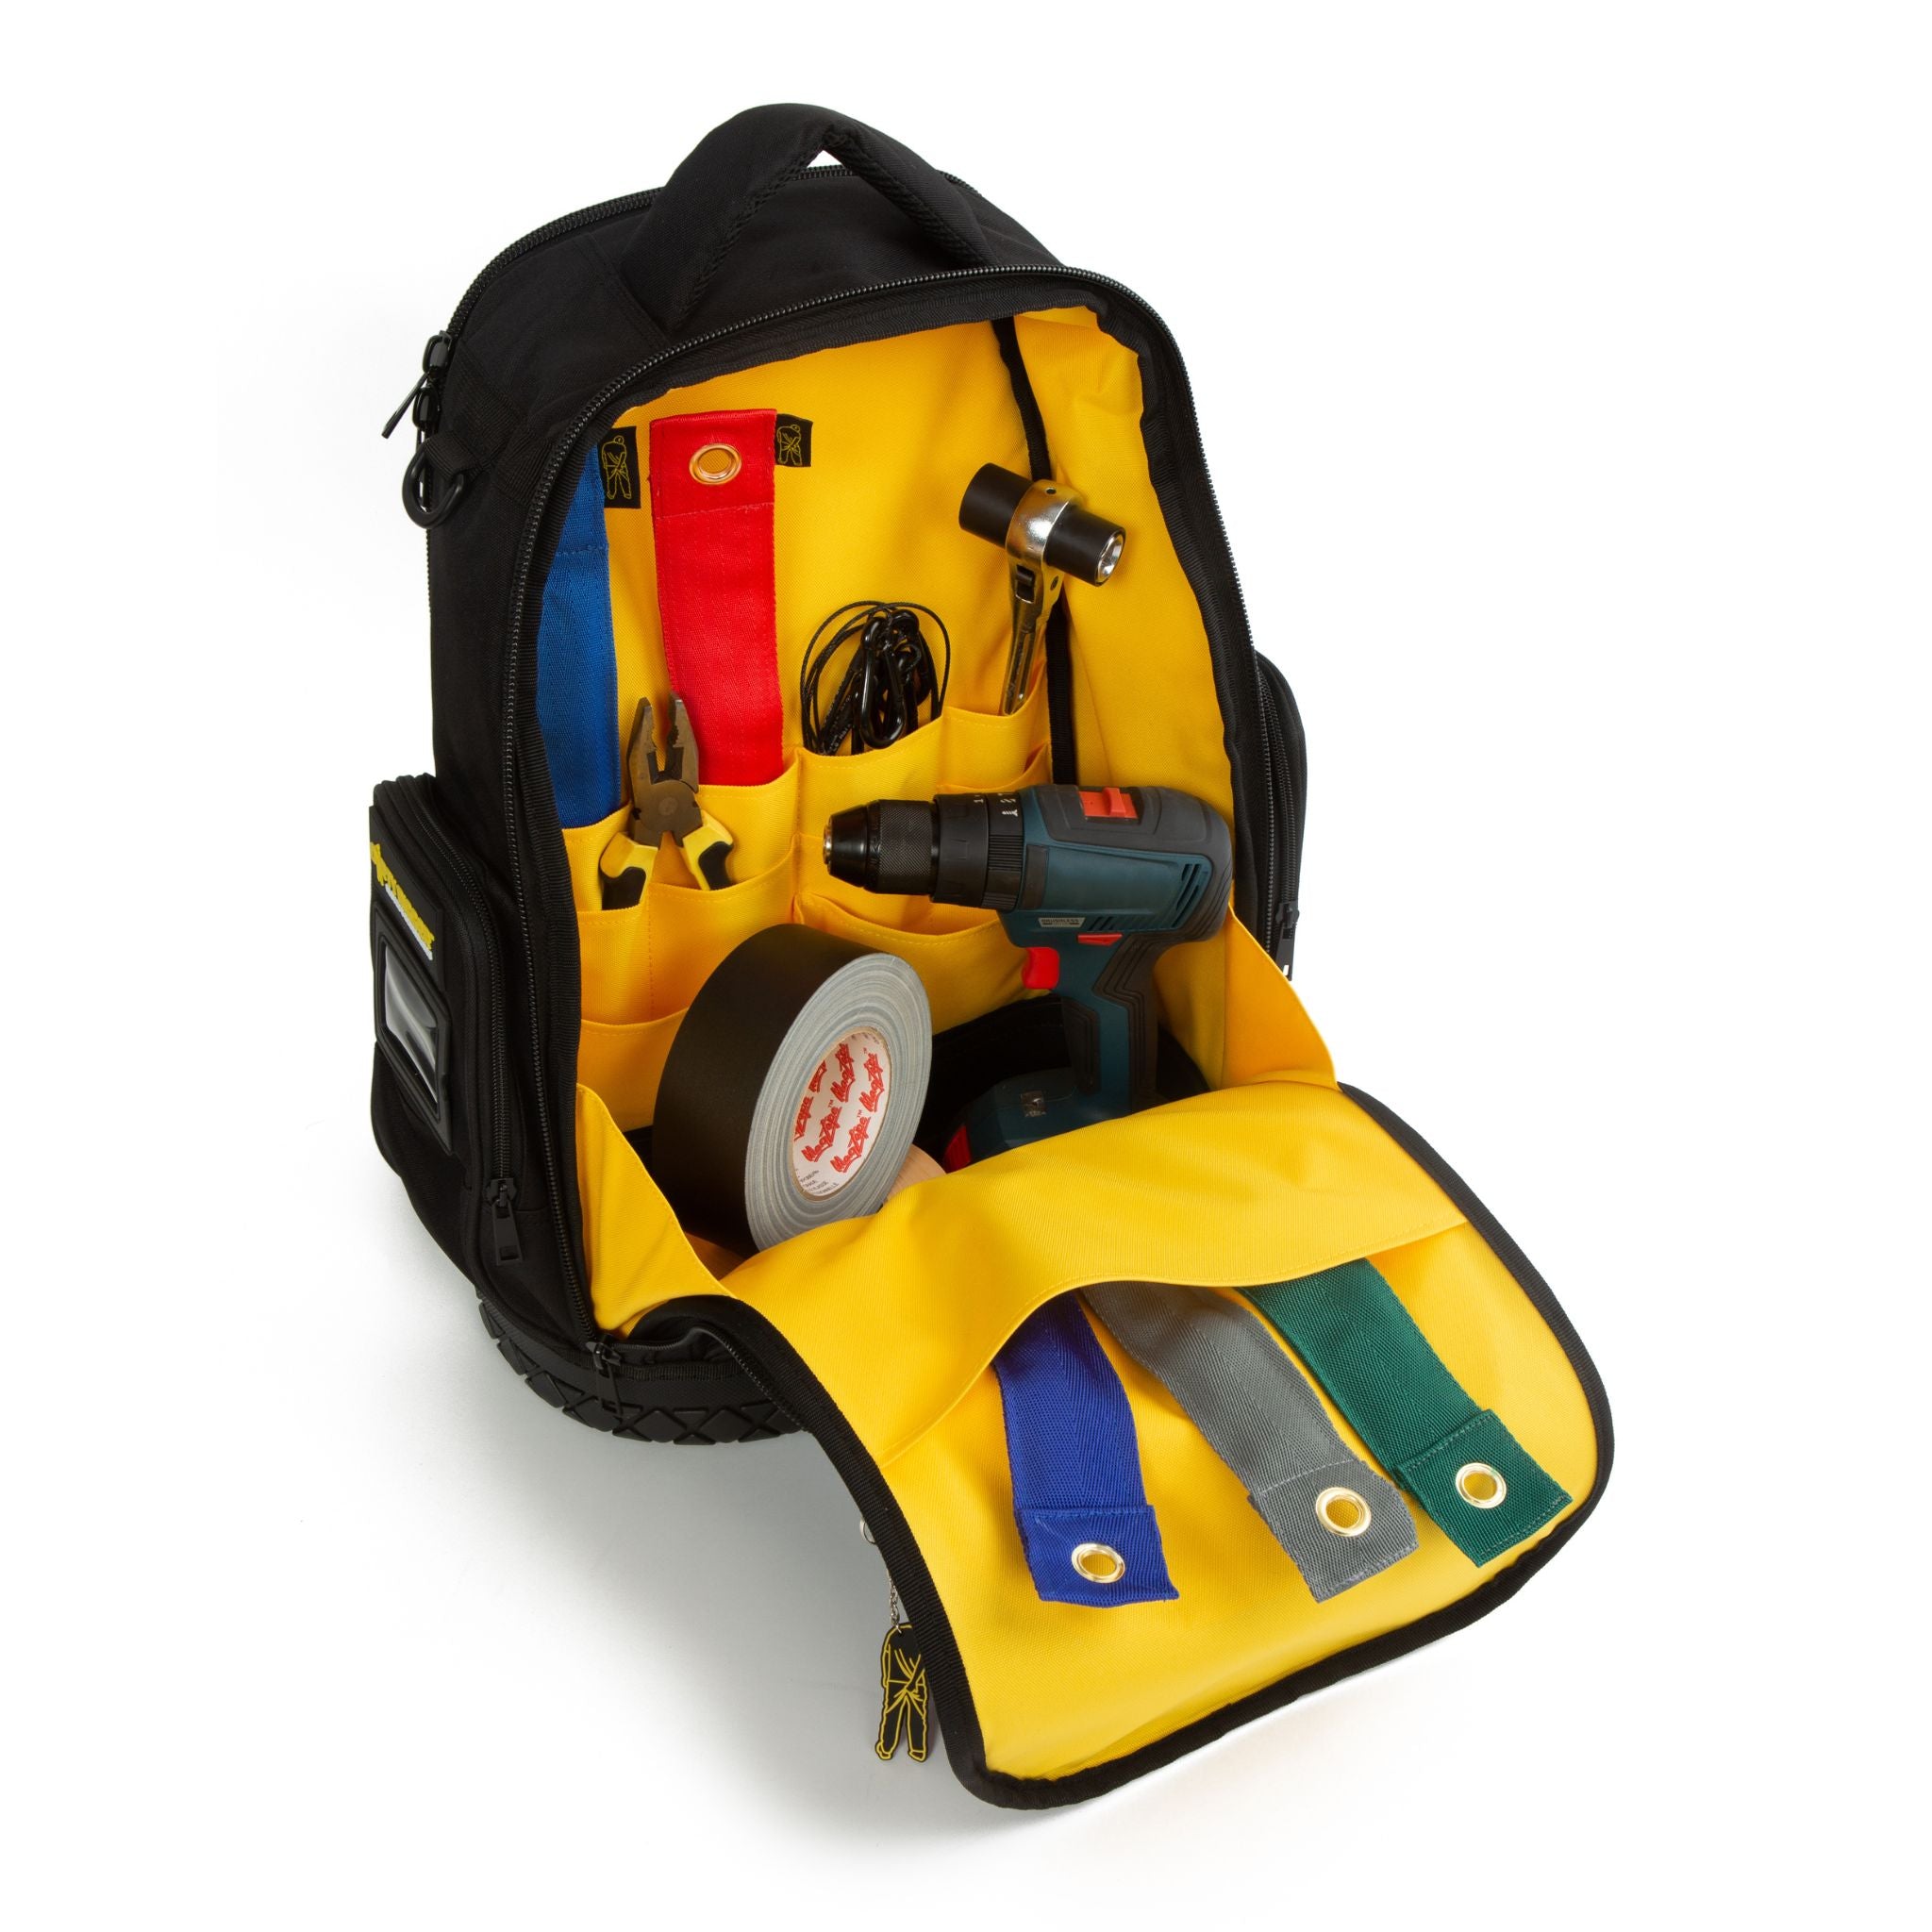 Technician's tool backpack with large interior